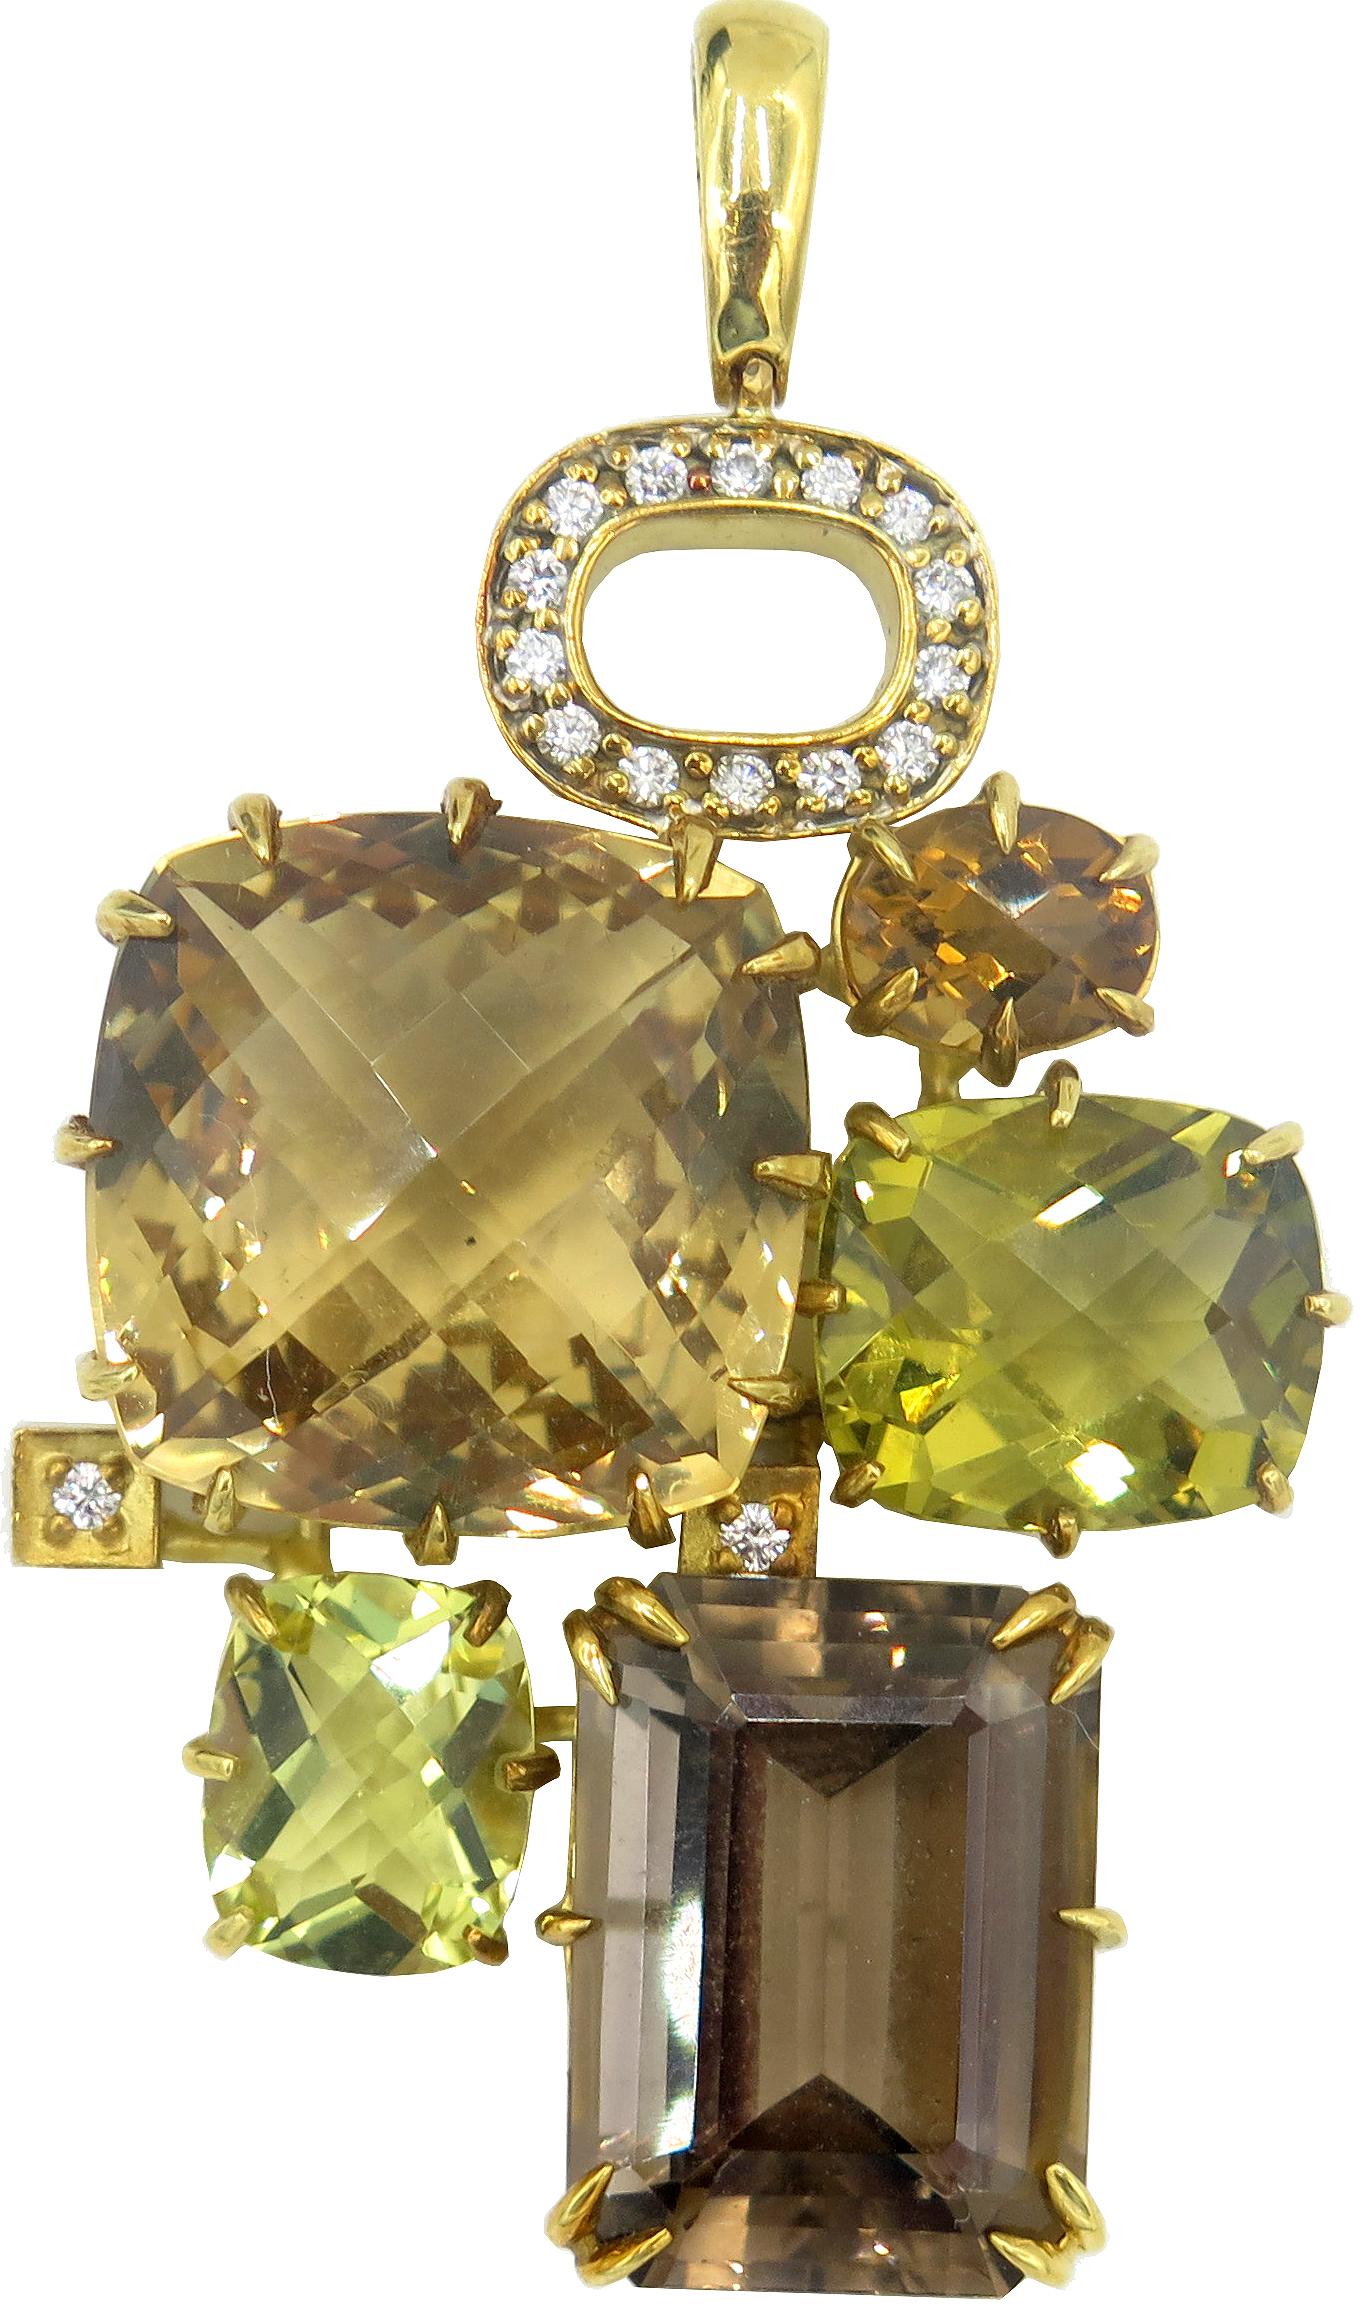 A pendant and earring set of timeless beauty by Seidengang, set in 18k yellow gold. Fourteen beautiful round diamonds are mounted in a gold oval at the top of the pendant. Attached to the oval are faceted gems of Peridot, Citrine and Quartz, forming